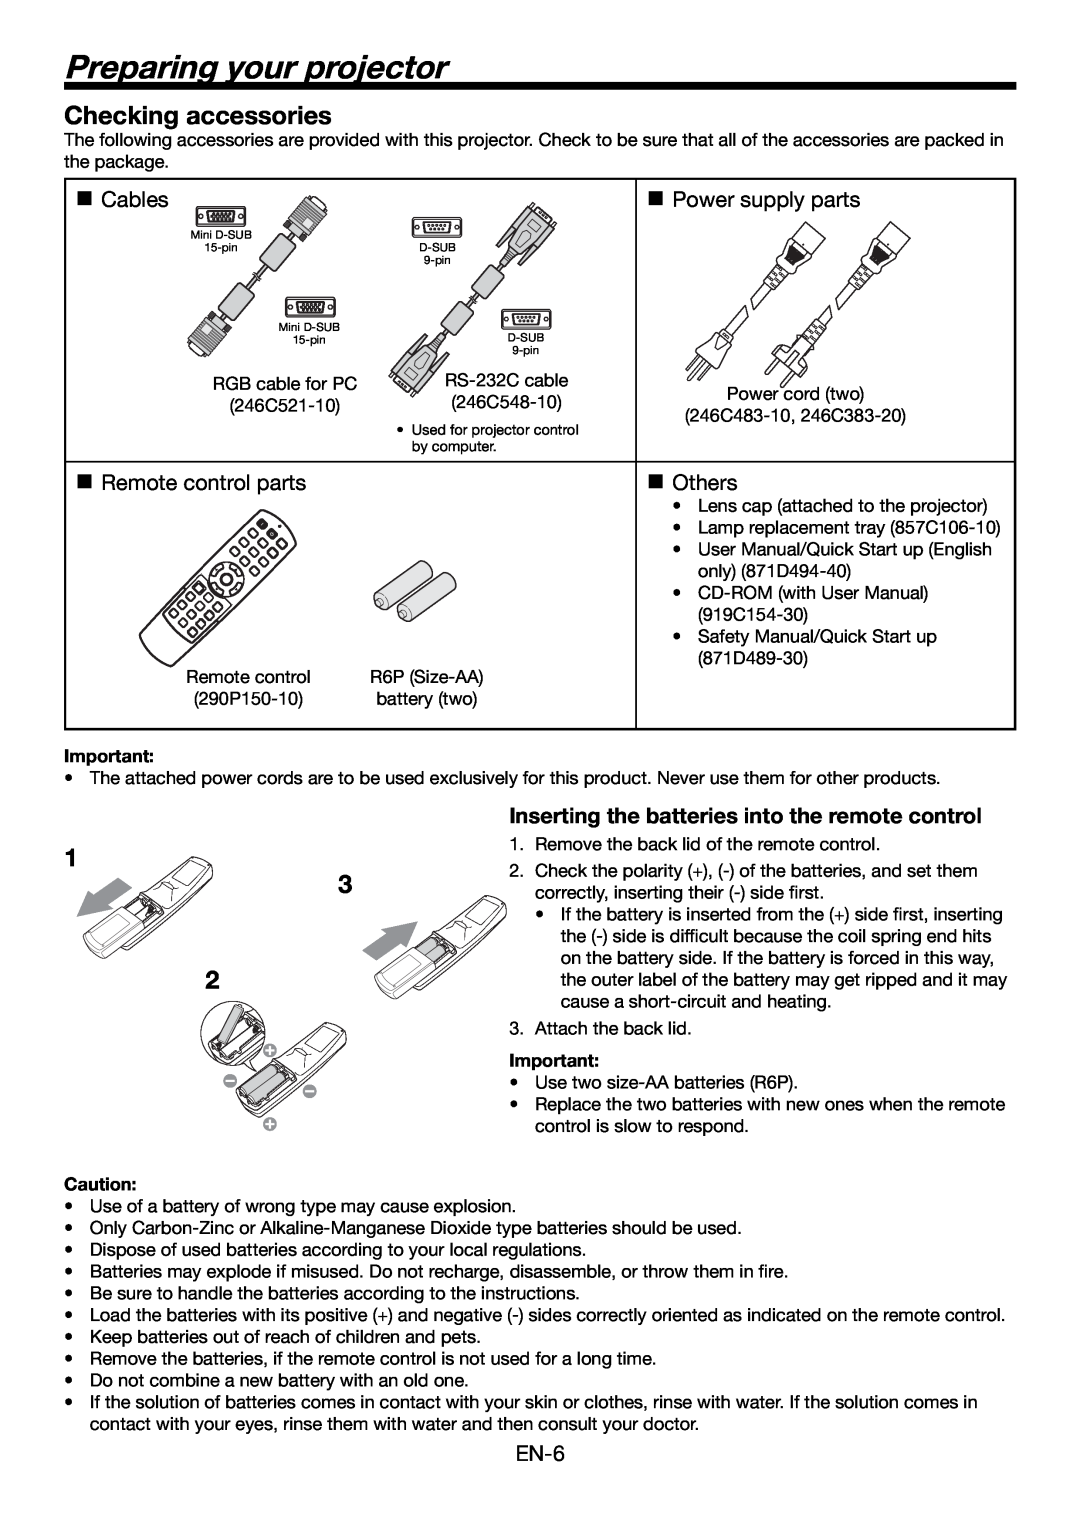 Mitsubishi Electronics HC4900 user manual Preparing your projector, Checking accessories, „ Cables, „ Others 